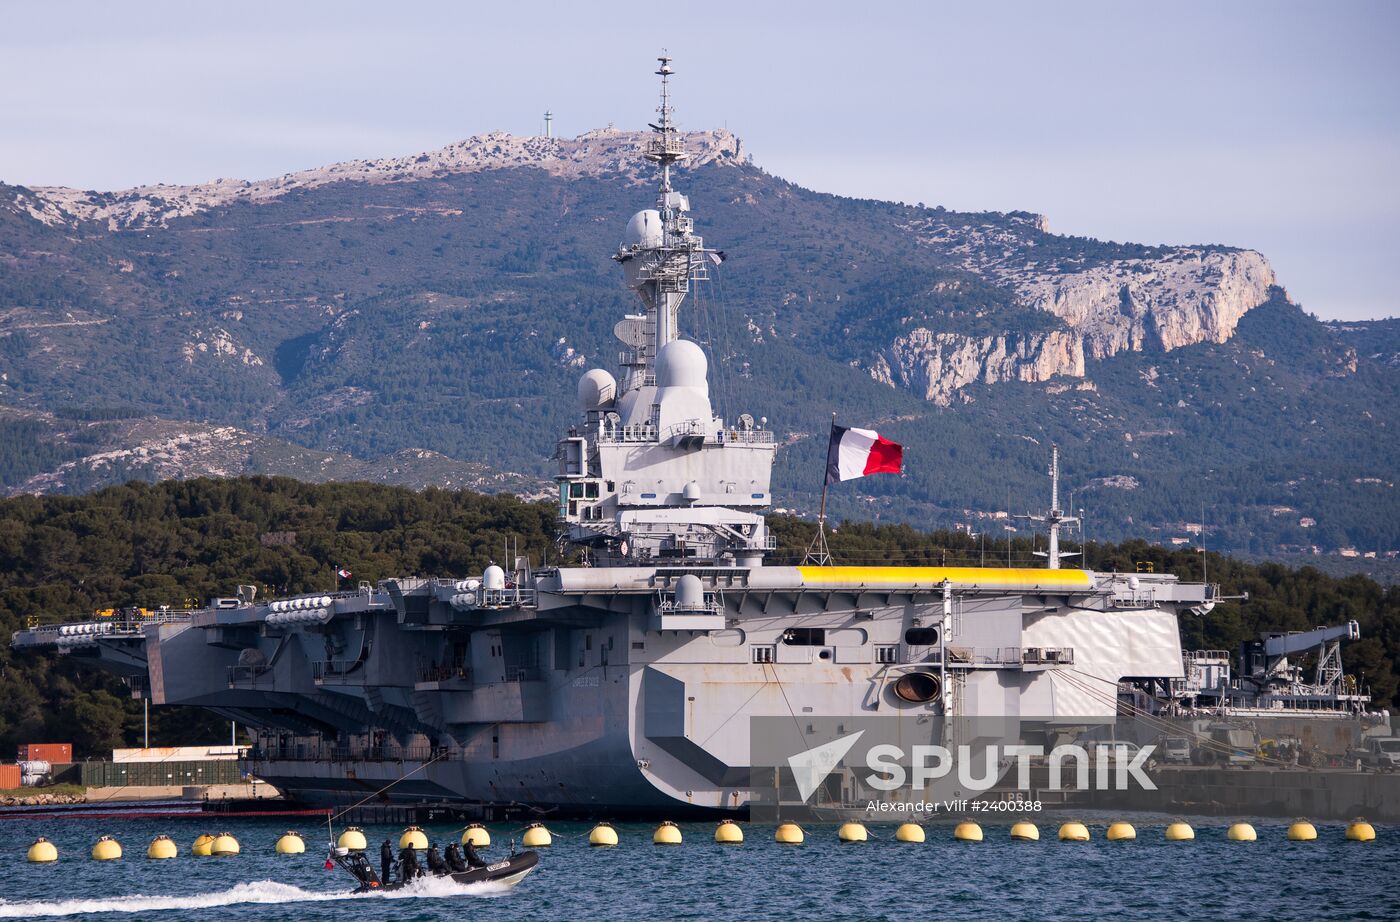 The Charles De Gaulle aircraft carrier